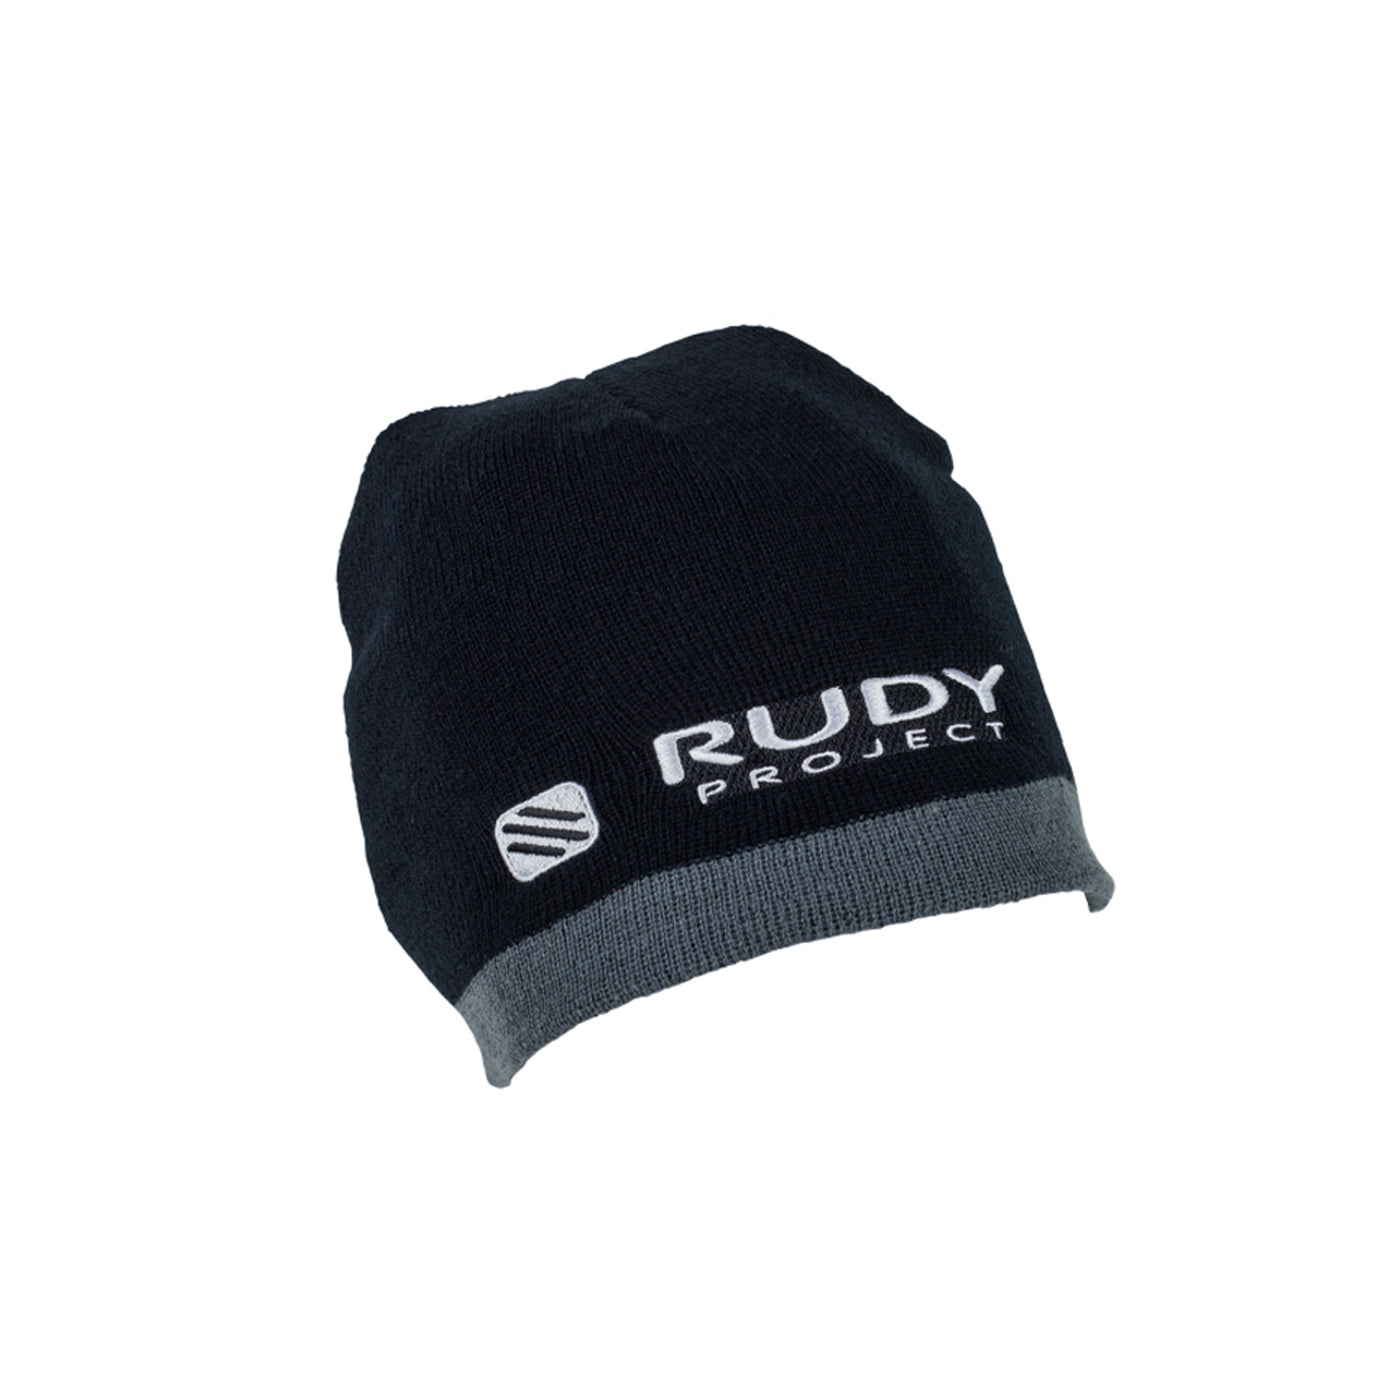 Rudy Project Beanie